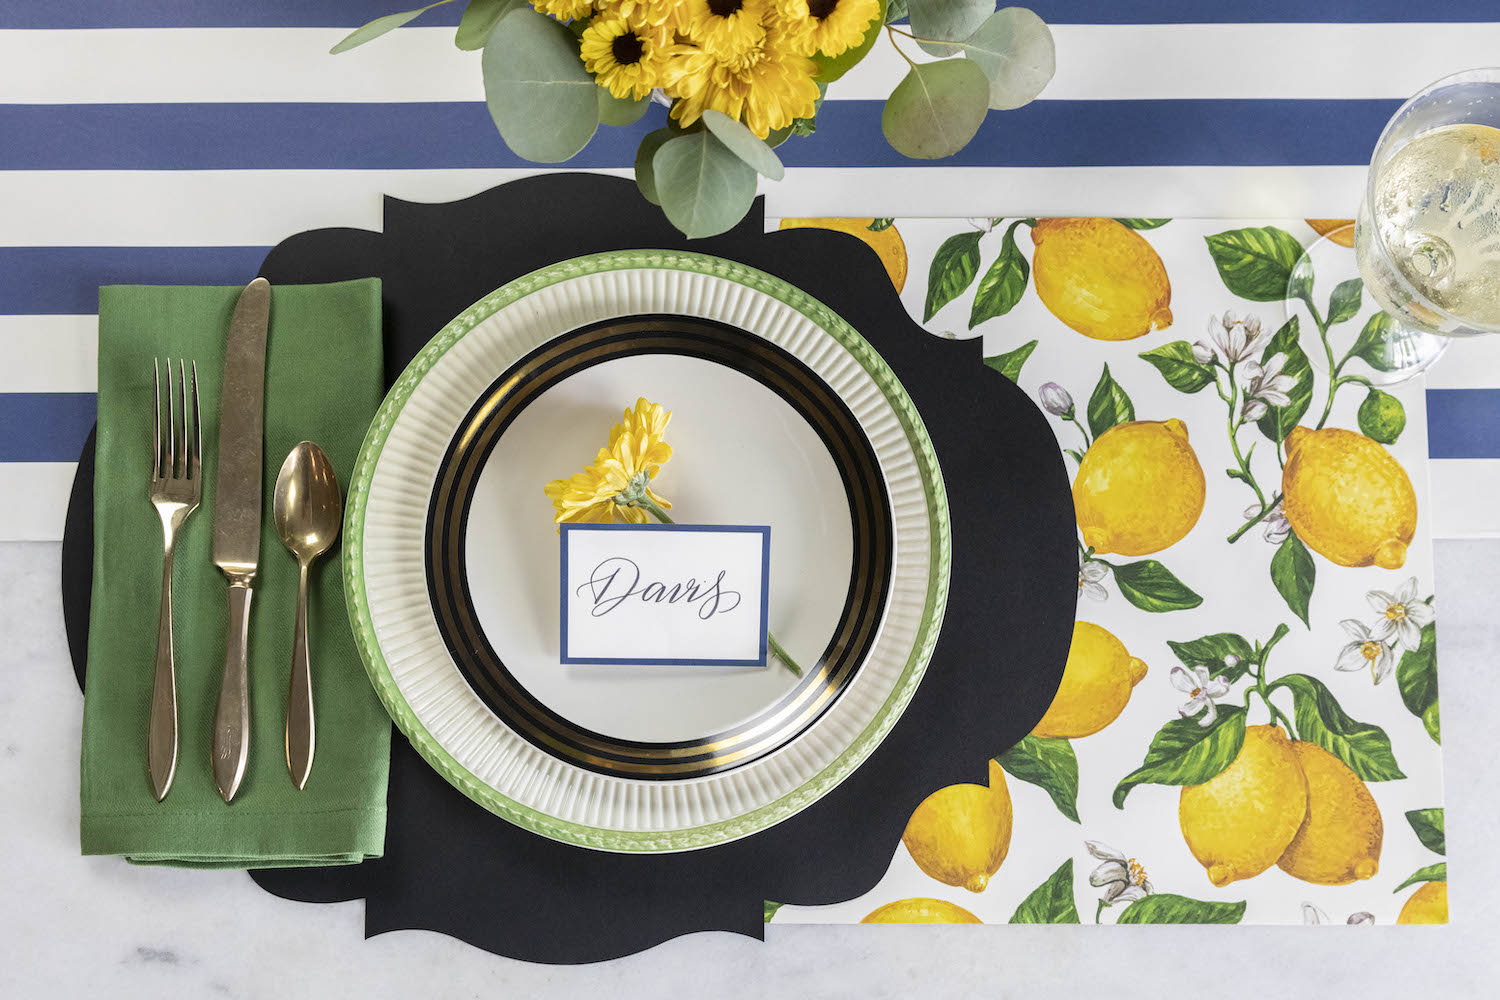 Placesetting with Die-cut Black French Frame Placemat 